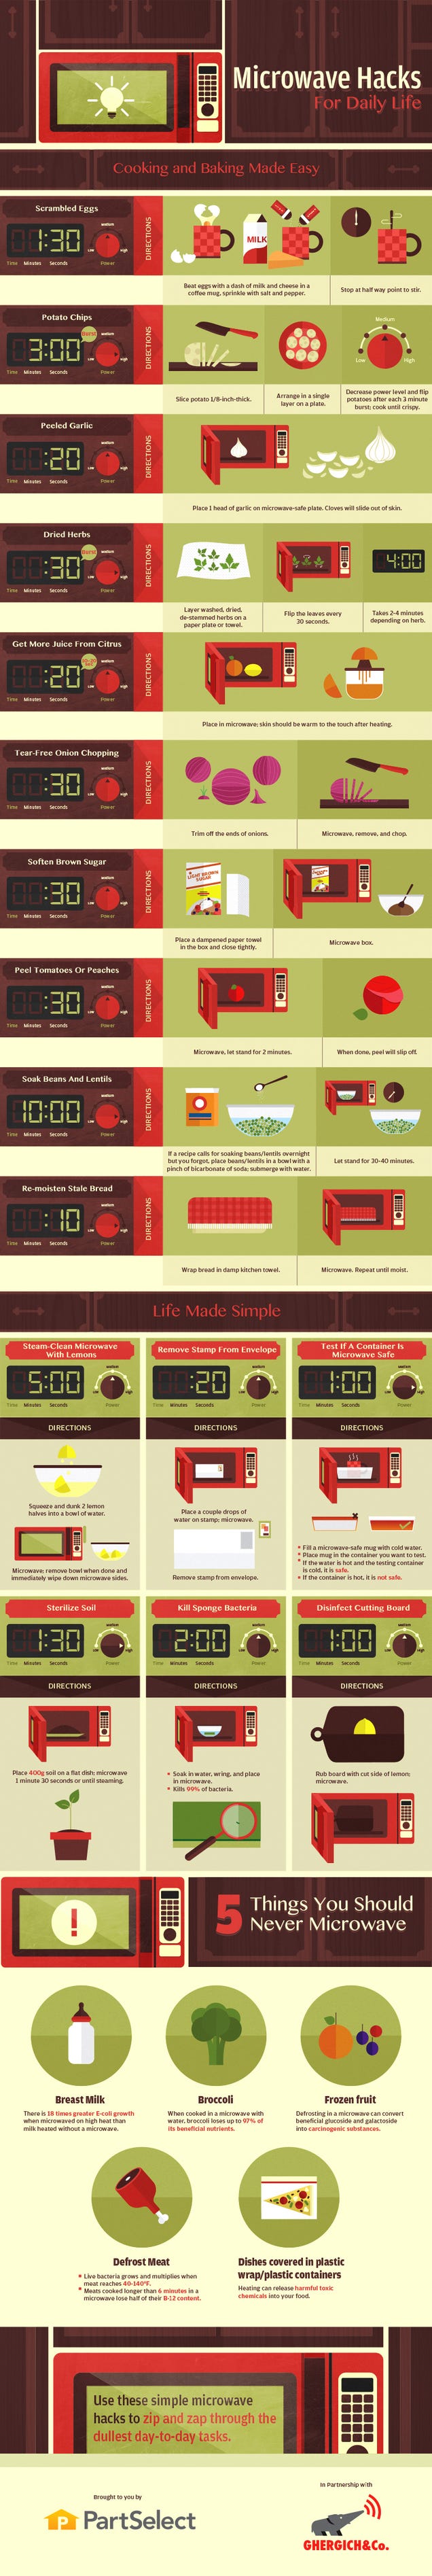 This Infographic is a Cheat Sheet For Clever Microwave Uses